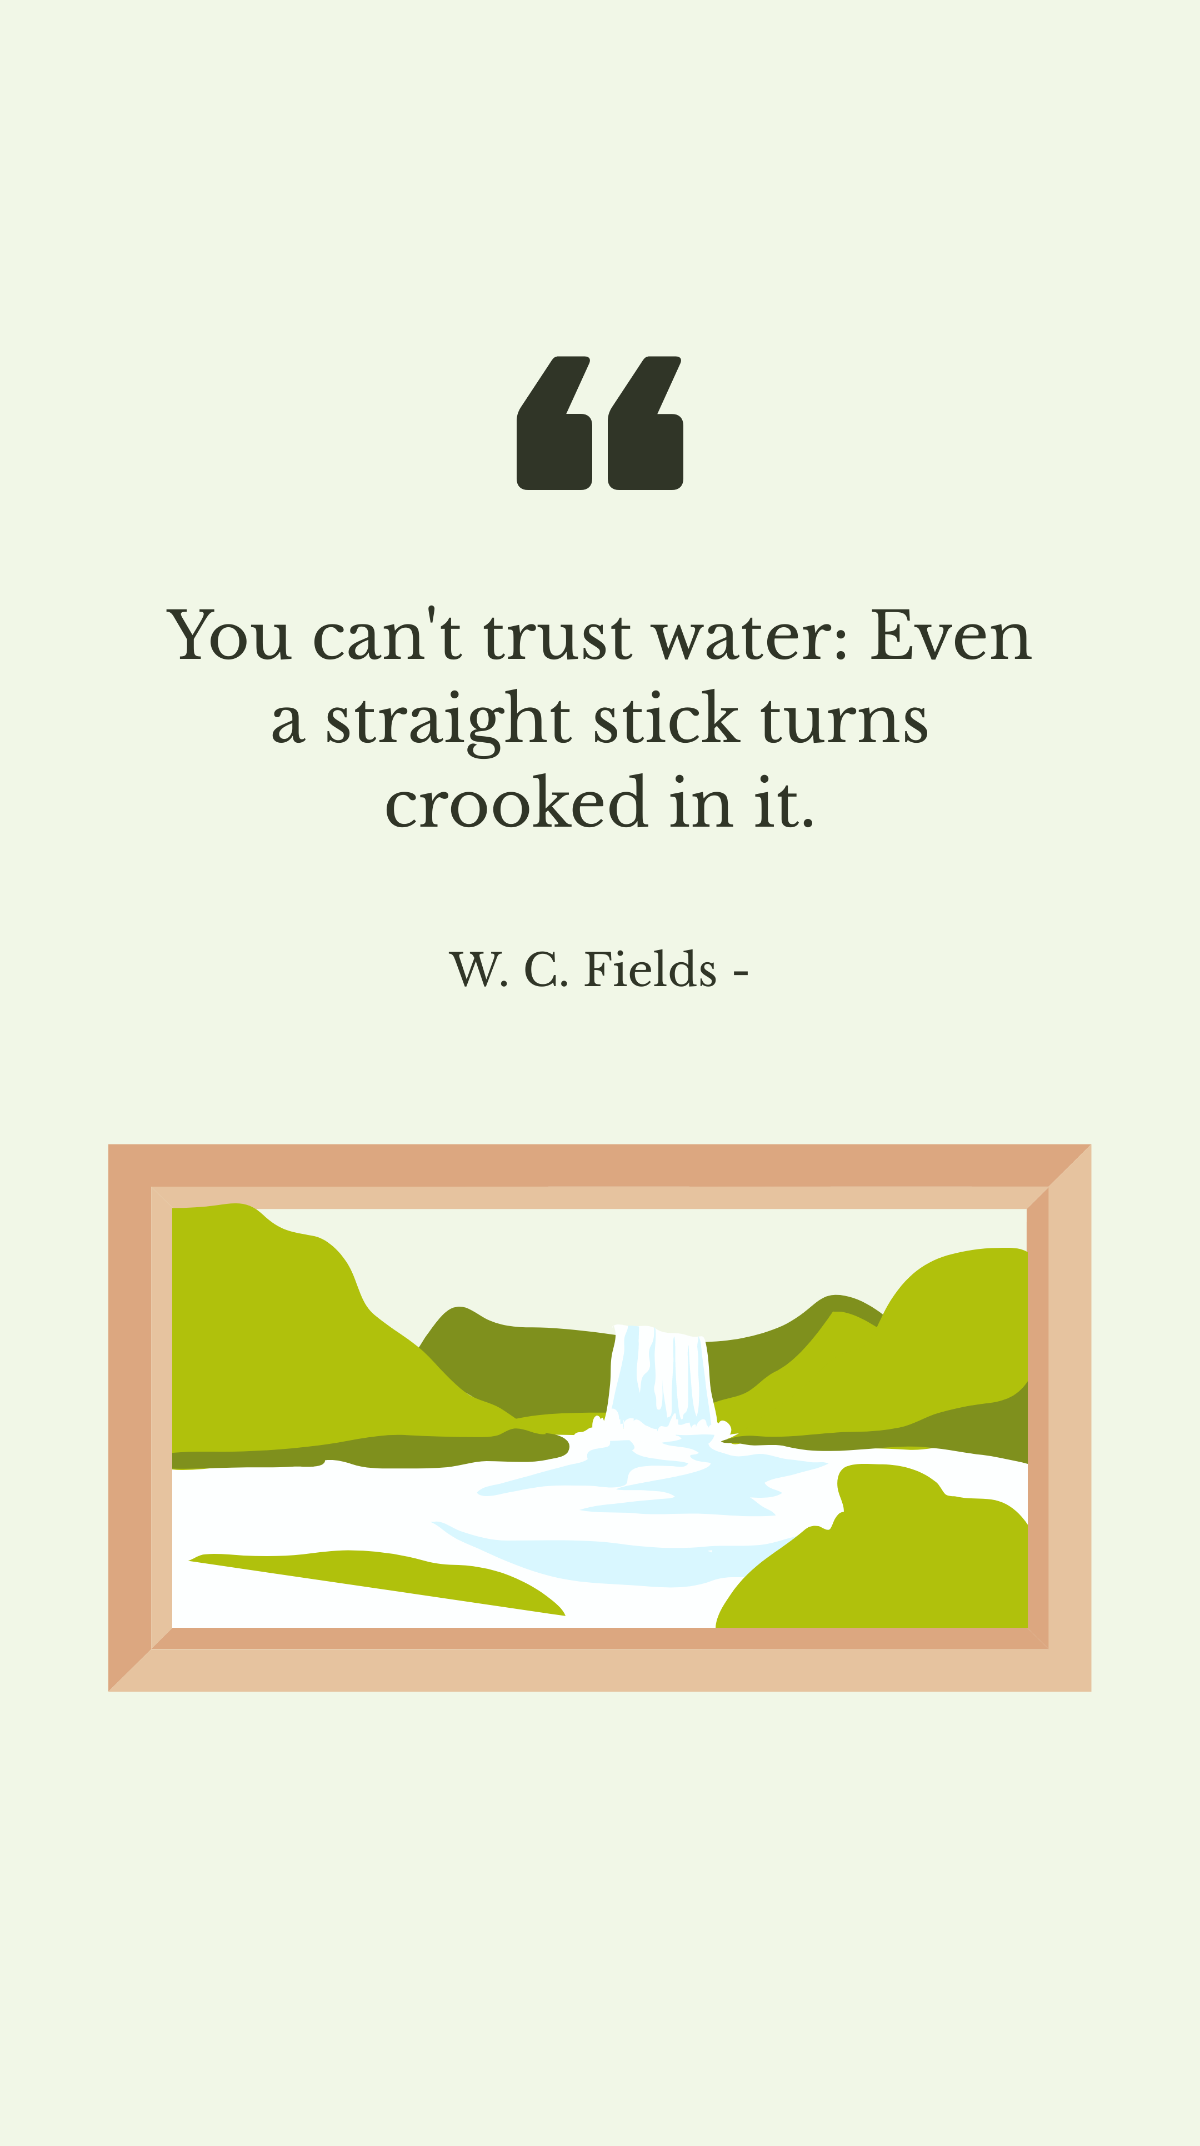 Free W. C. Fields - You can't trust water: Even a straight stick turns crooked in it. Template